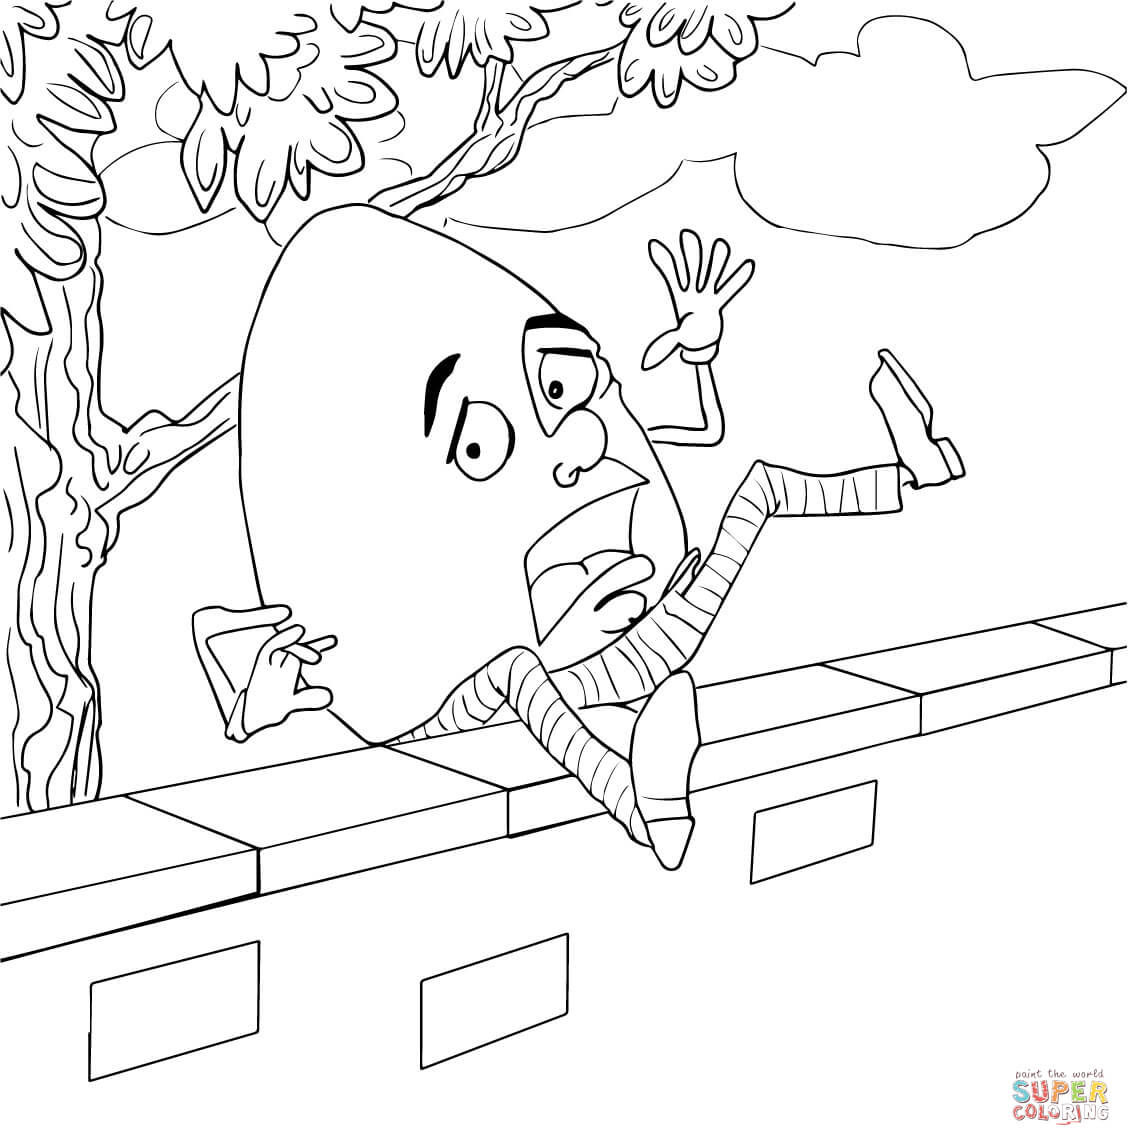 Humpty Dumpty Fell Off The Wall Coloring Page | Free Printable - Printable Humpty Dumpty Puzzle